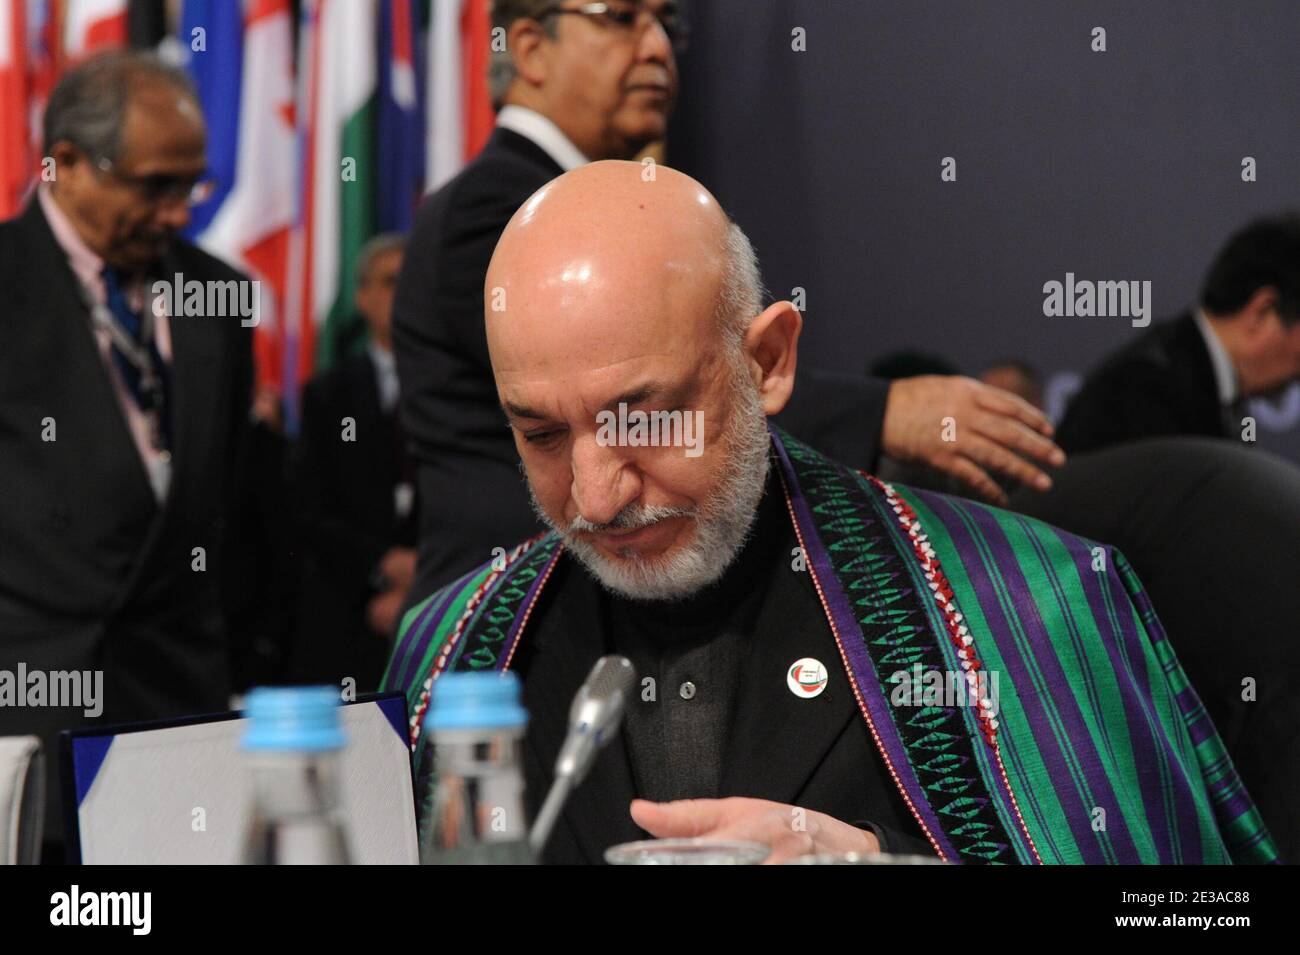 Afghan President Hamid Karzai is seen at the NATO Summit in Lisbon, Portugal, on November 20, 2010. Hand out Photo by Nids/NATO Media Library/ABACAPRESS.COM Stock Photo